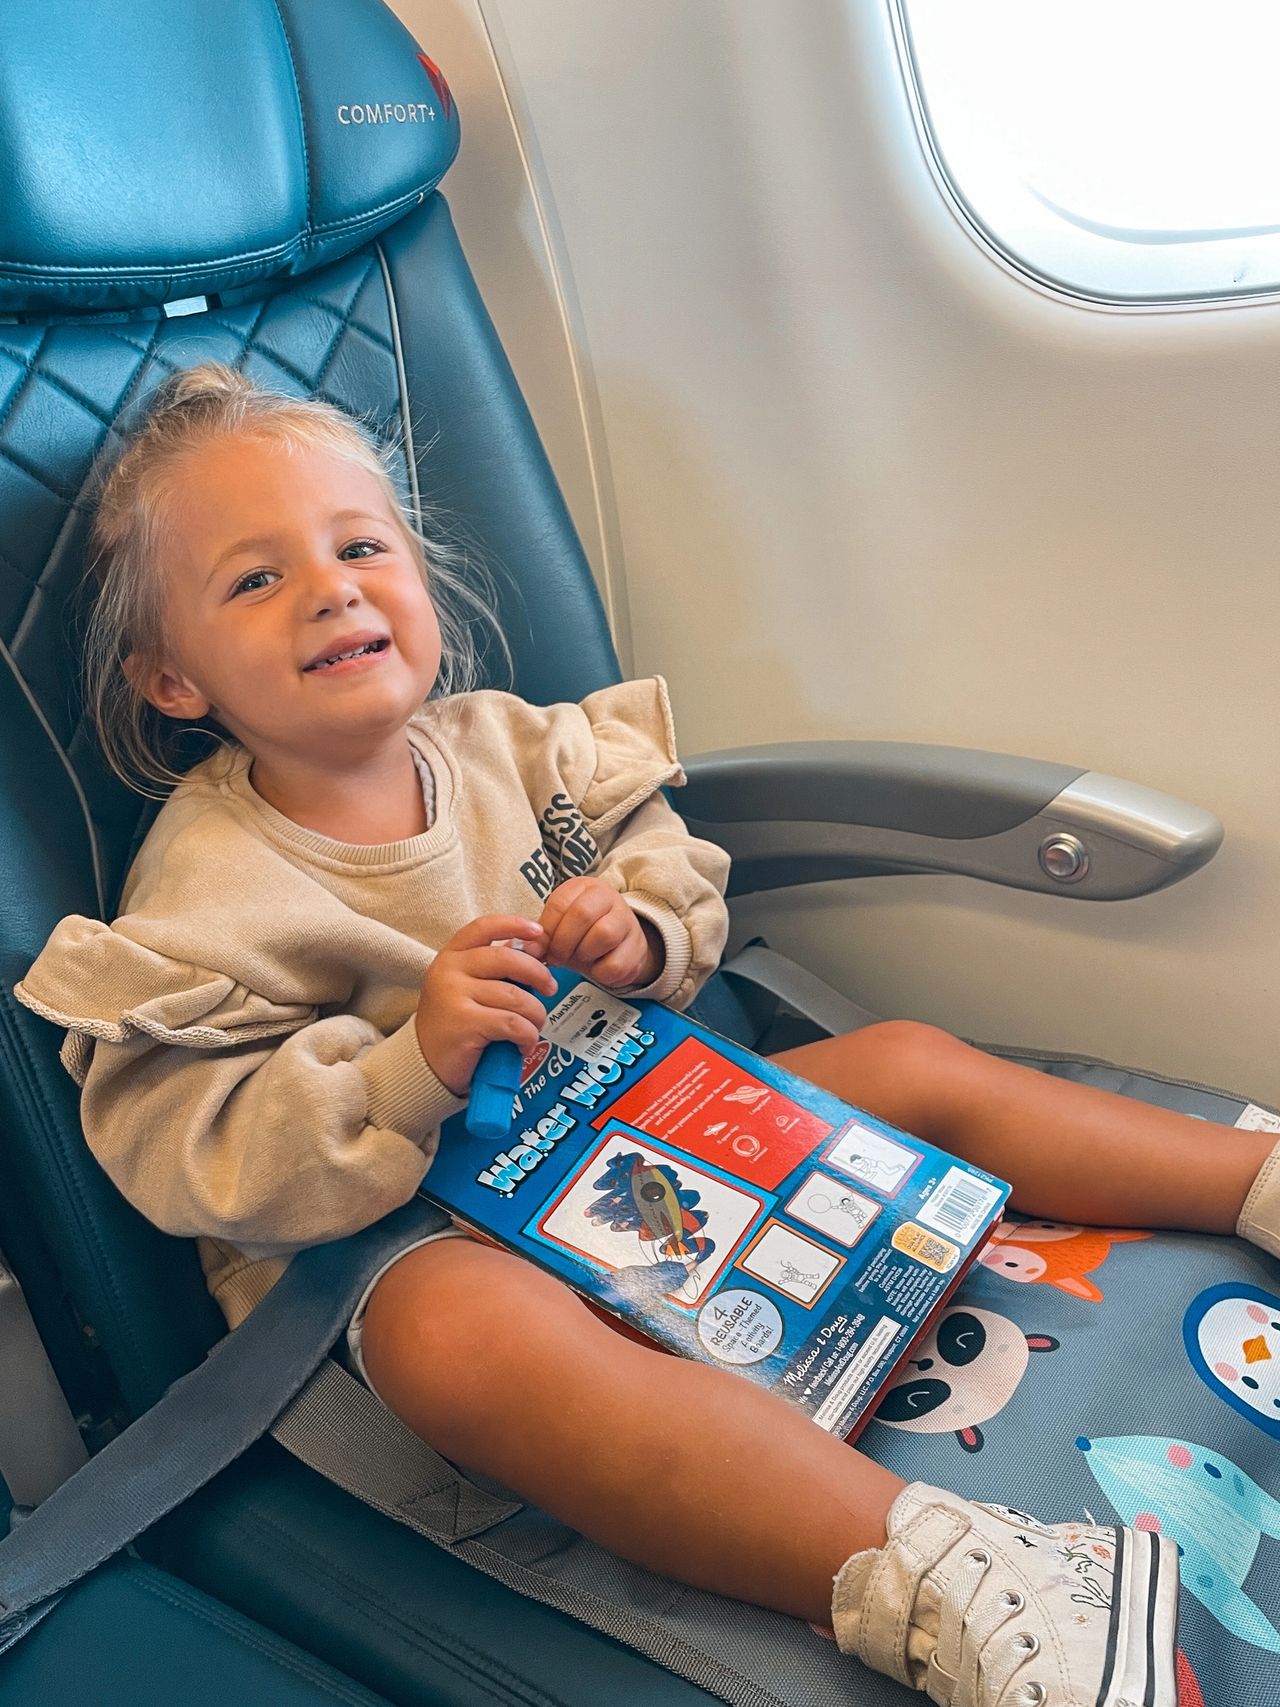 Airplane Footrest - Kids Toddler Bed Seat Extender Baby Travel